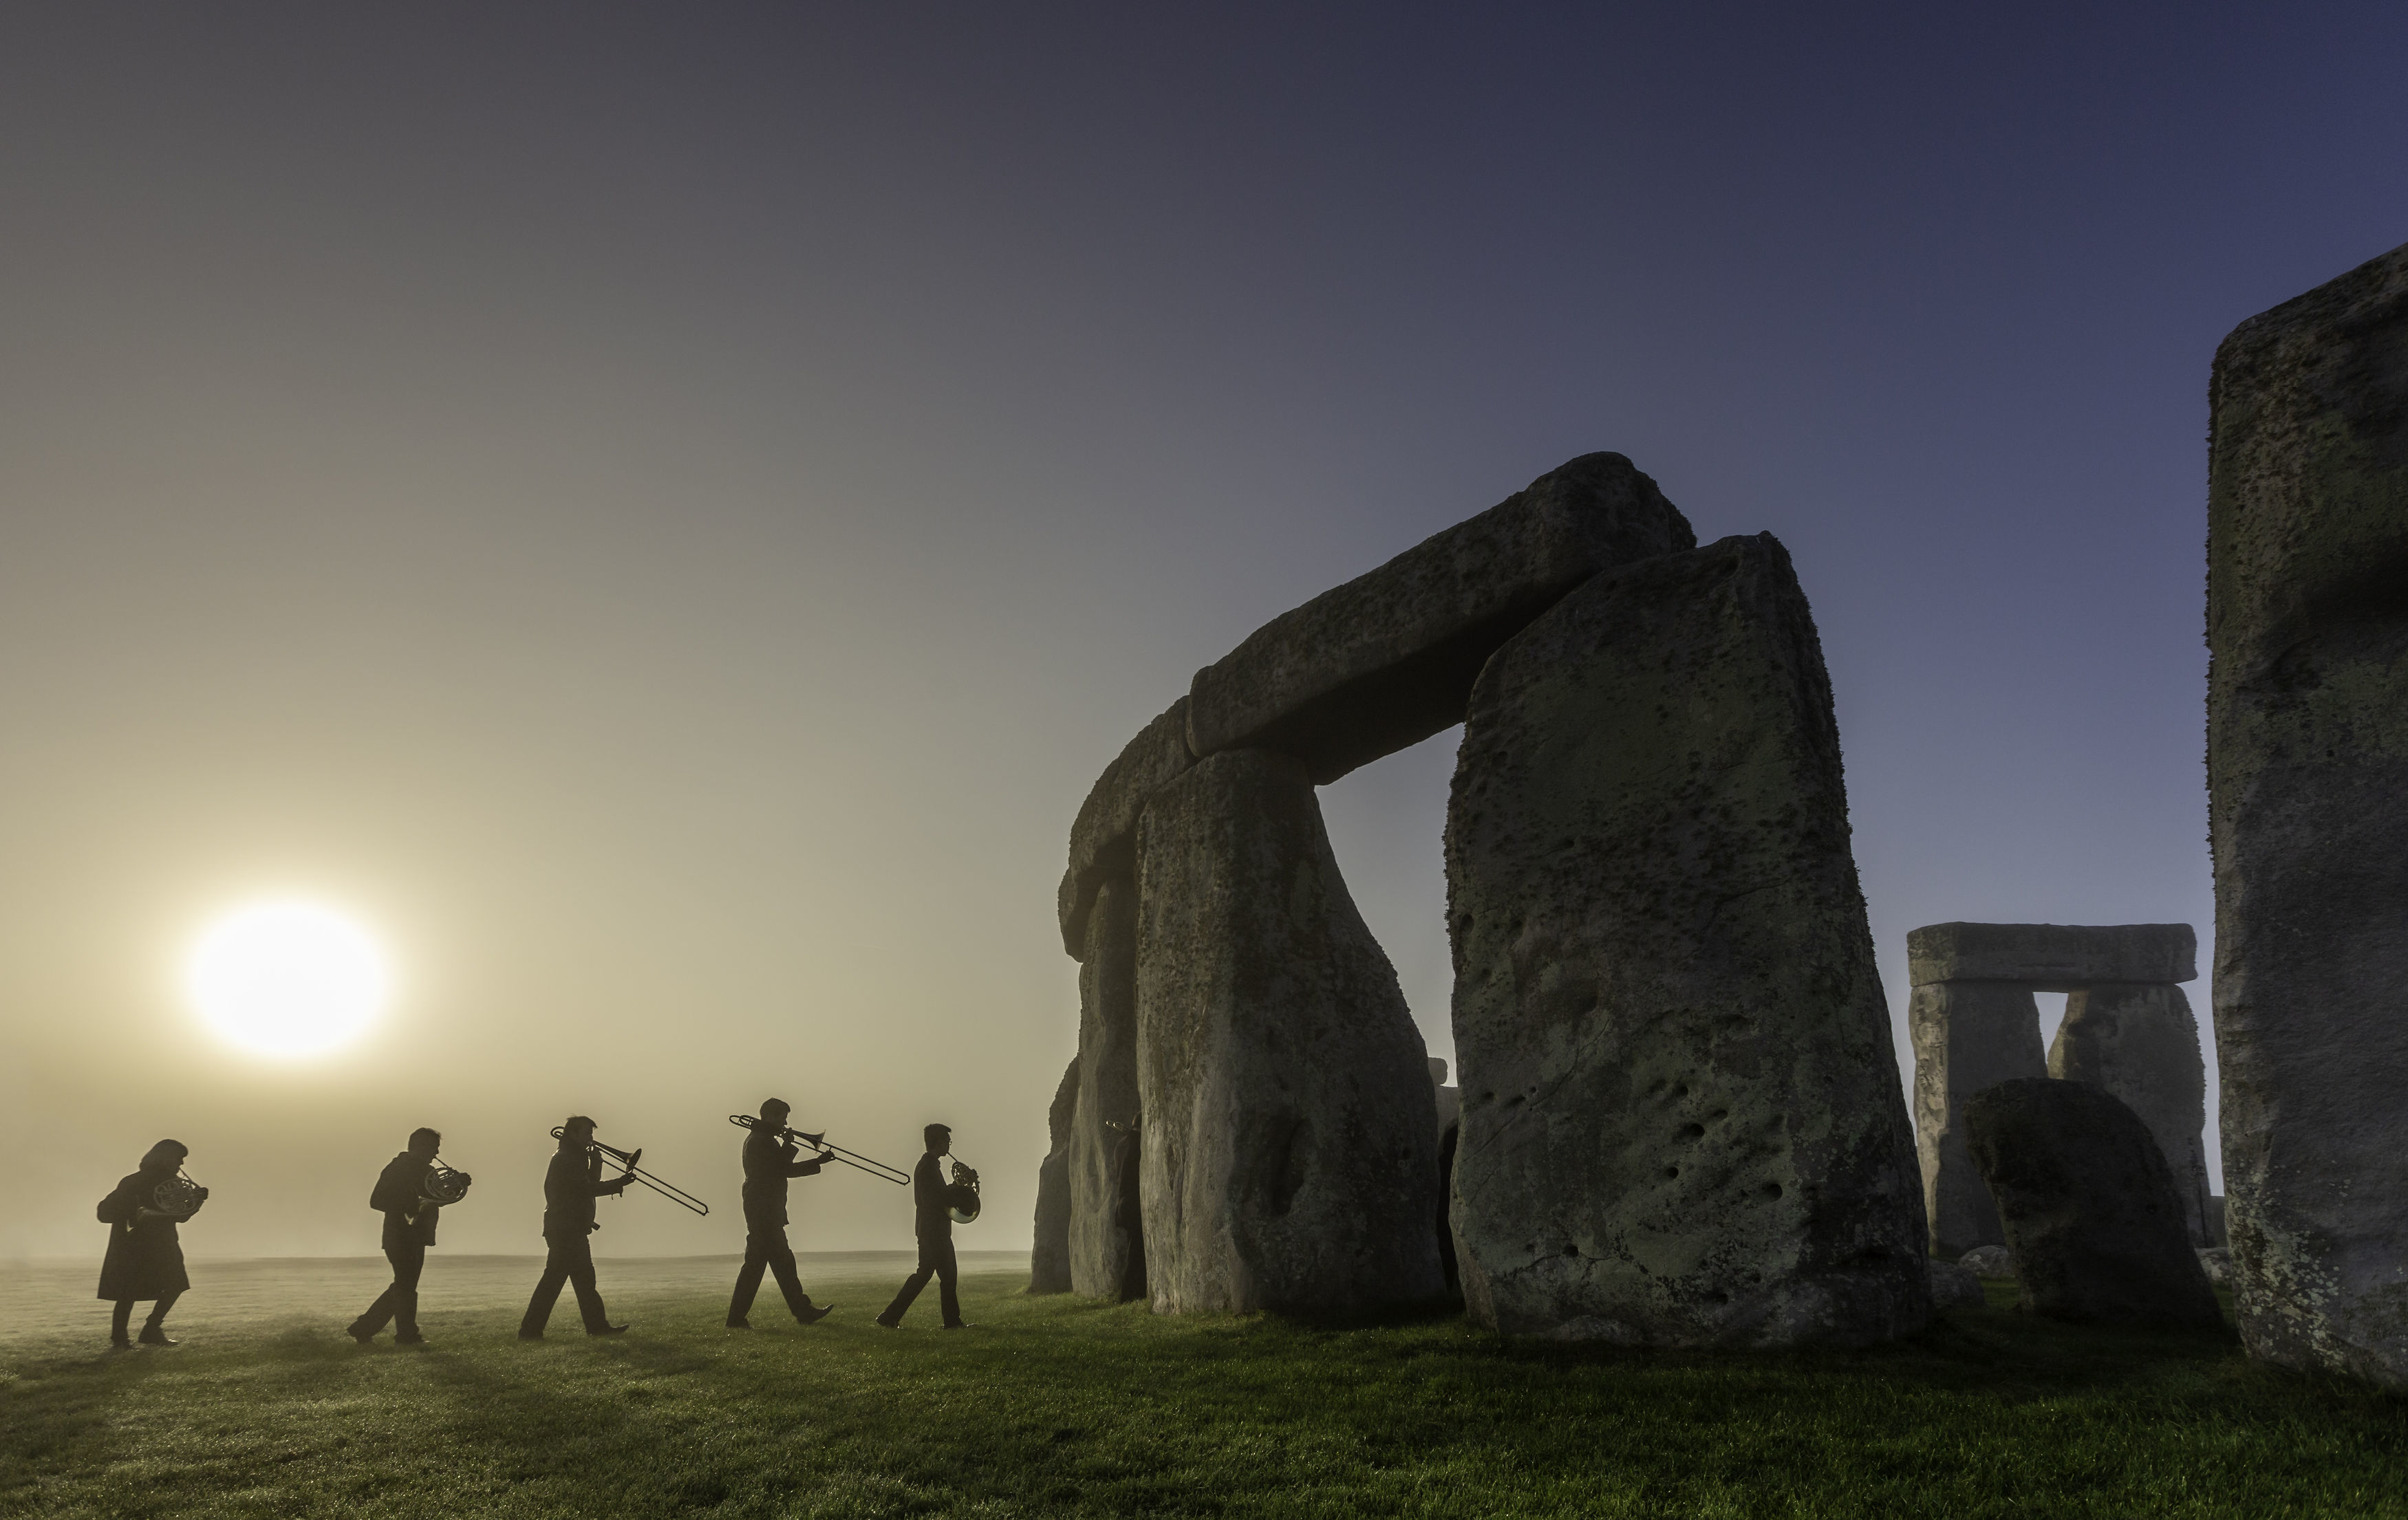 Musicians rehearsing at Stonehenge in Wiltshire ahead of English Heritage's celebrations marking 100 years since Stonehenge was donated to the nation